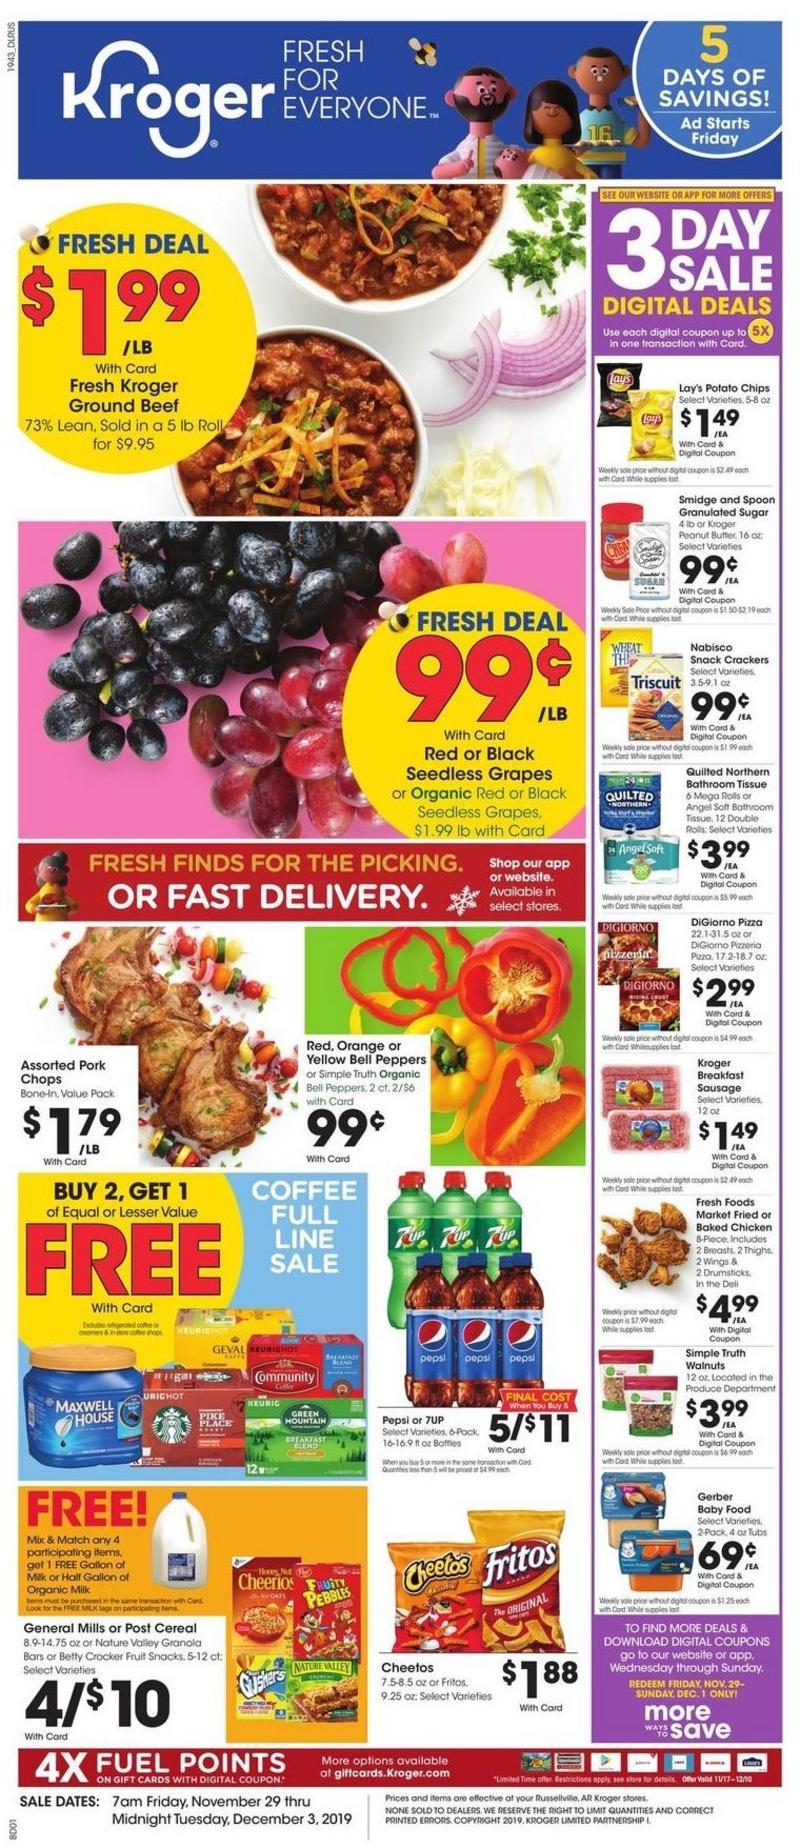 Kroger Weekly Ad from November 29